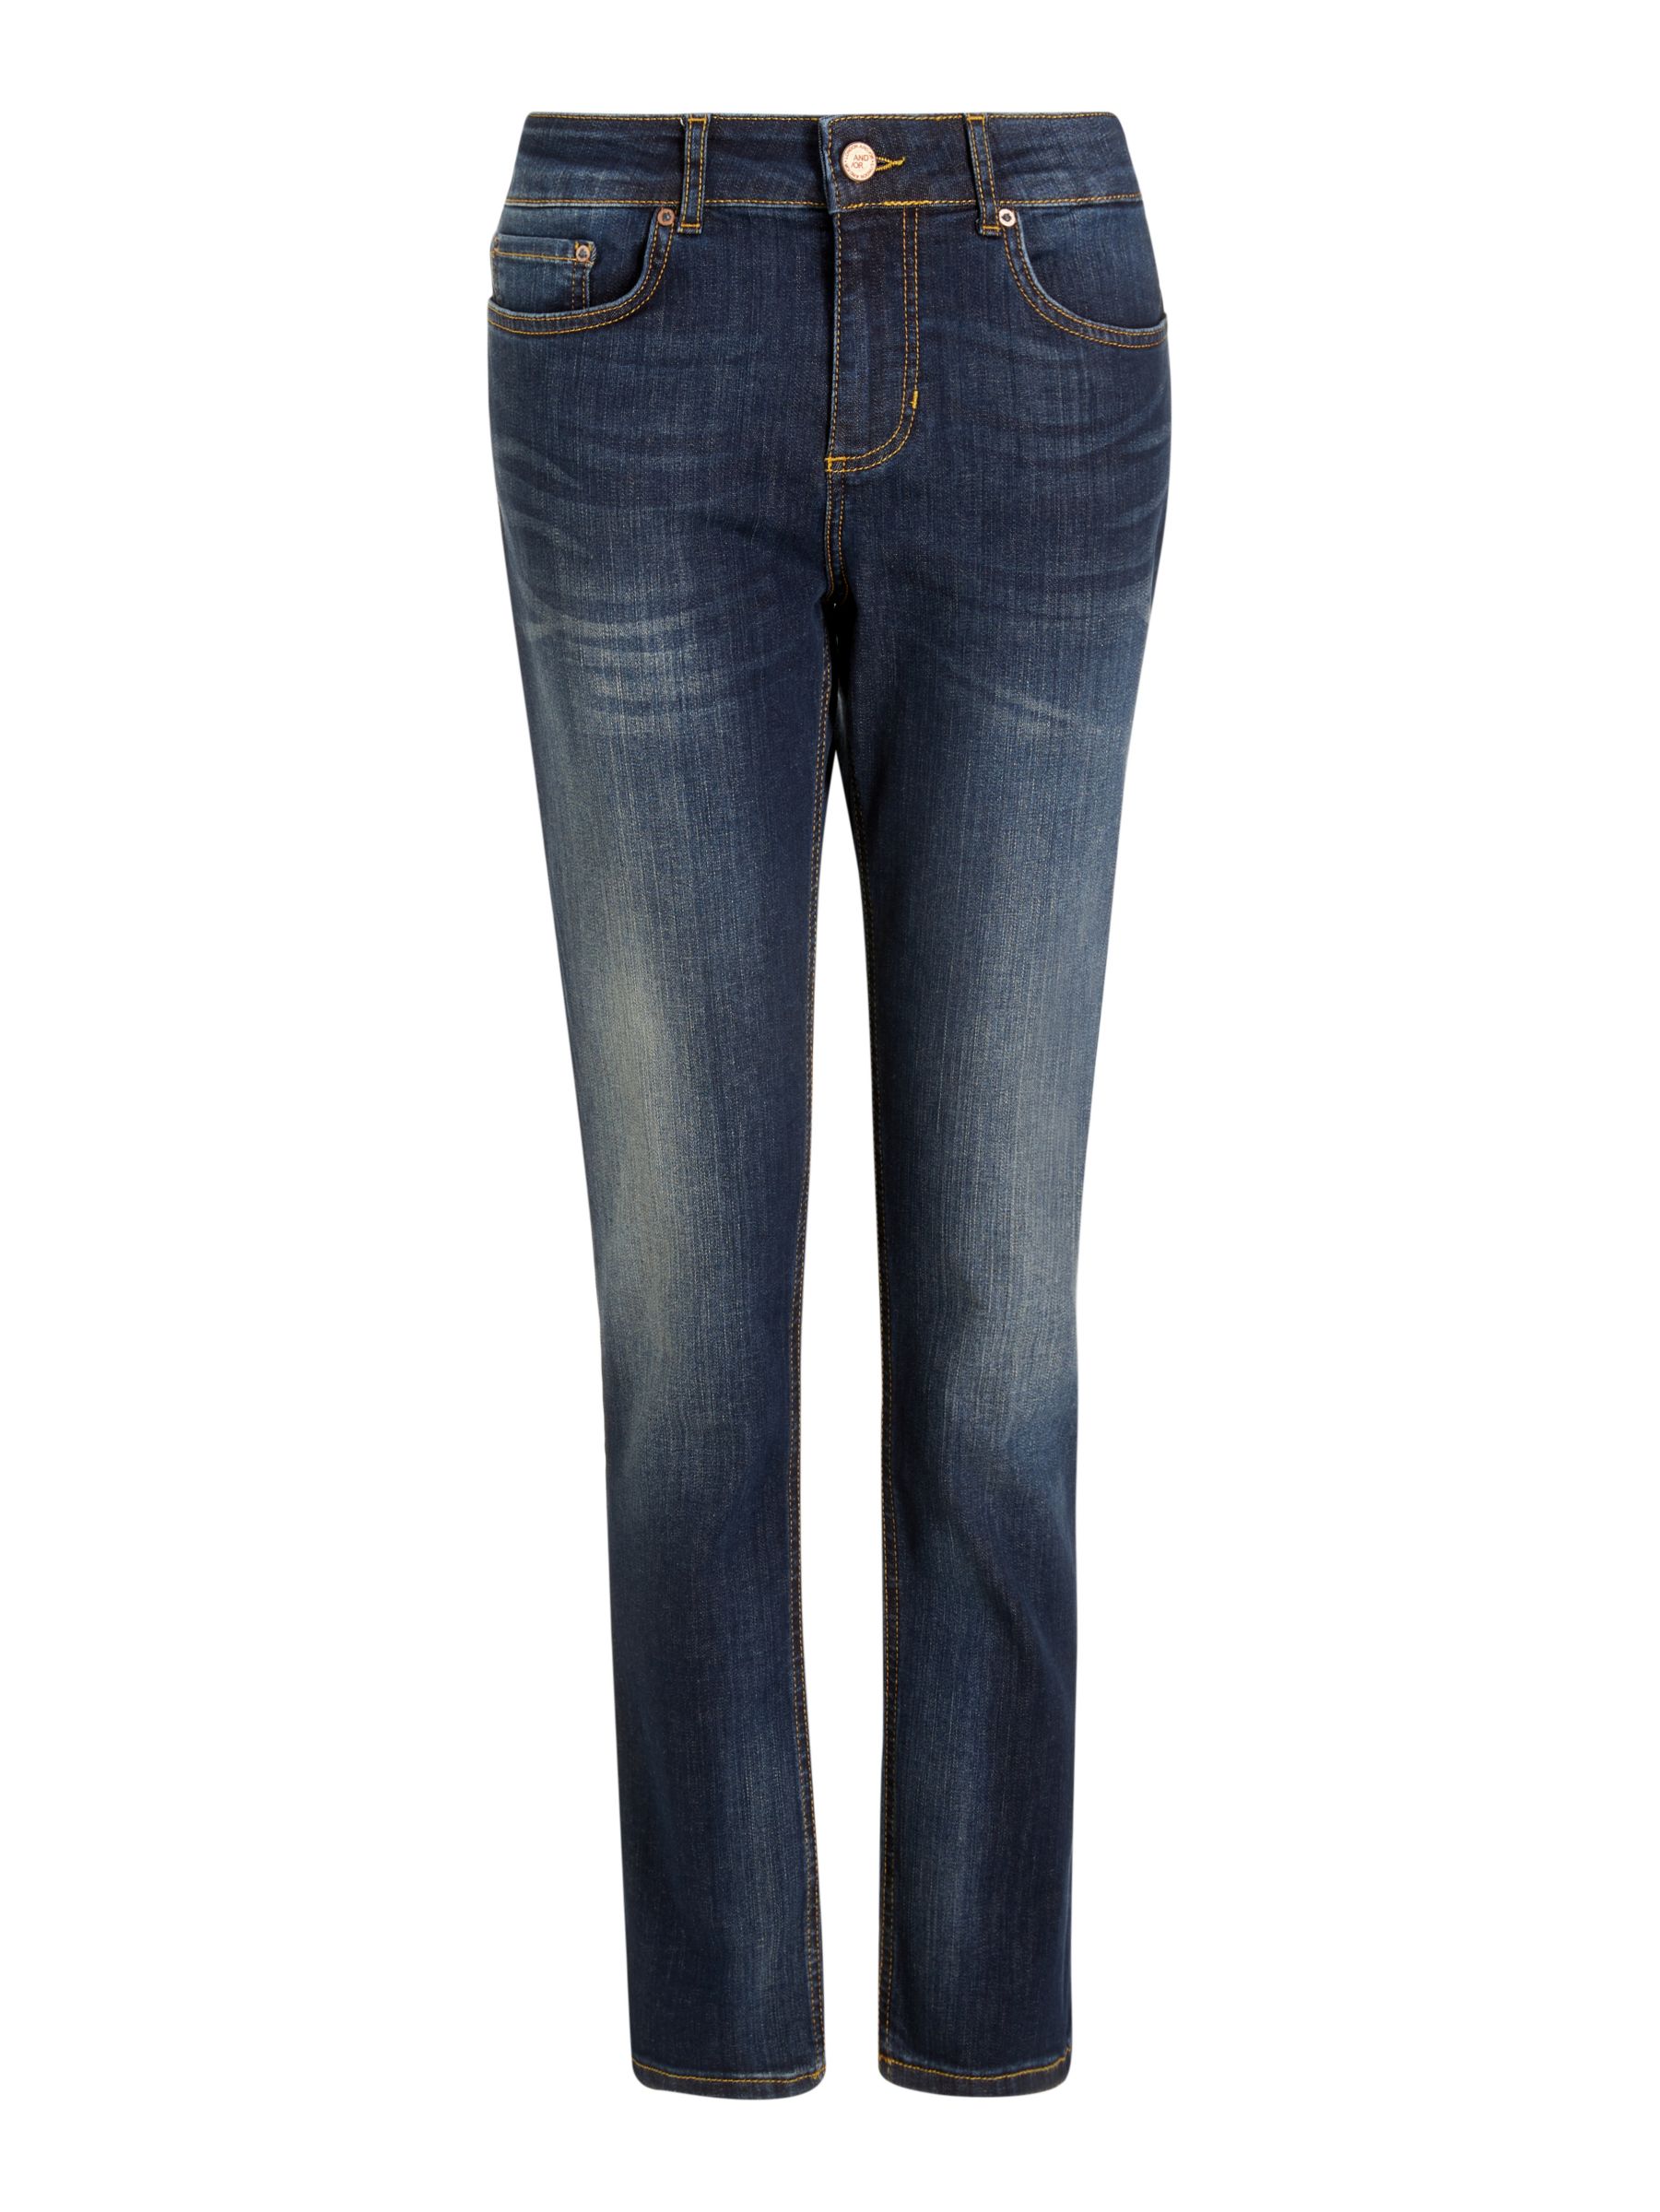 AND/OR Silverlake Straight Leg Jeans, Deja Blue at John Lewis & Partners